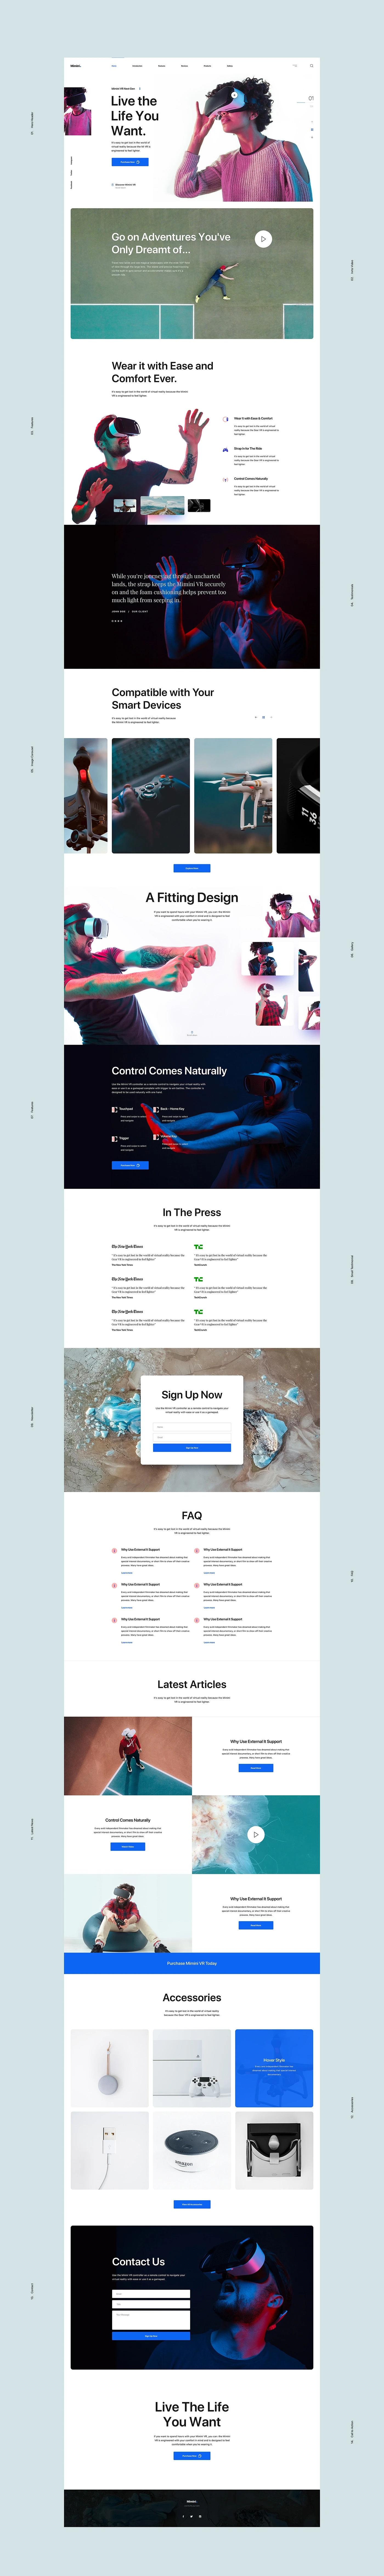 Mimini Free Landing Page - 14 sections are included in design. The artboard is fully editable, layered, carefully organized